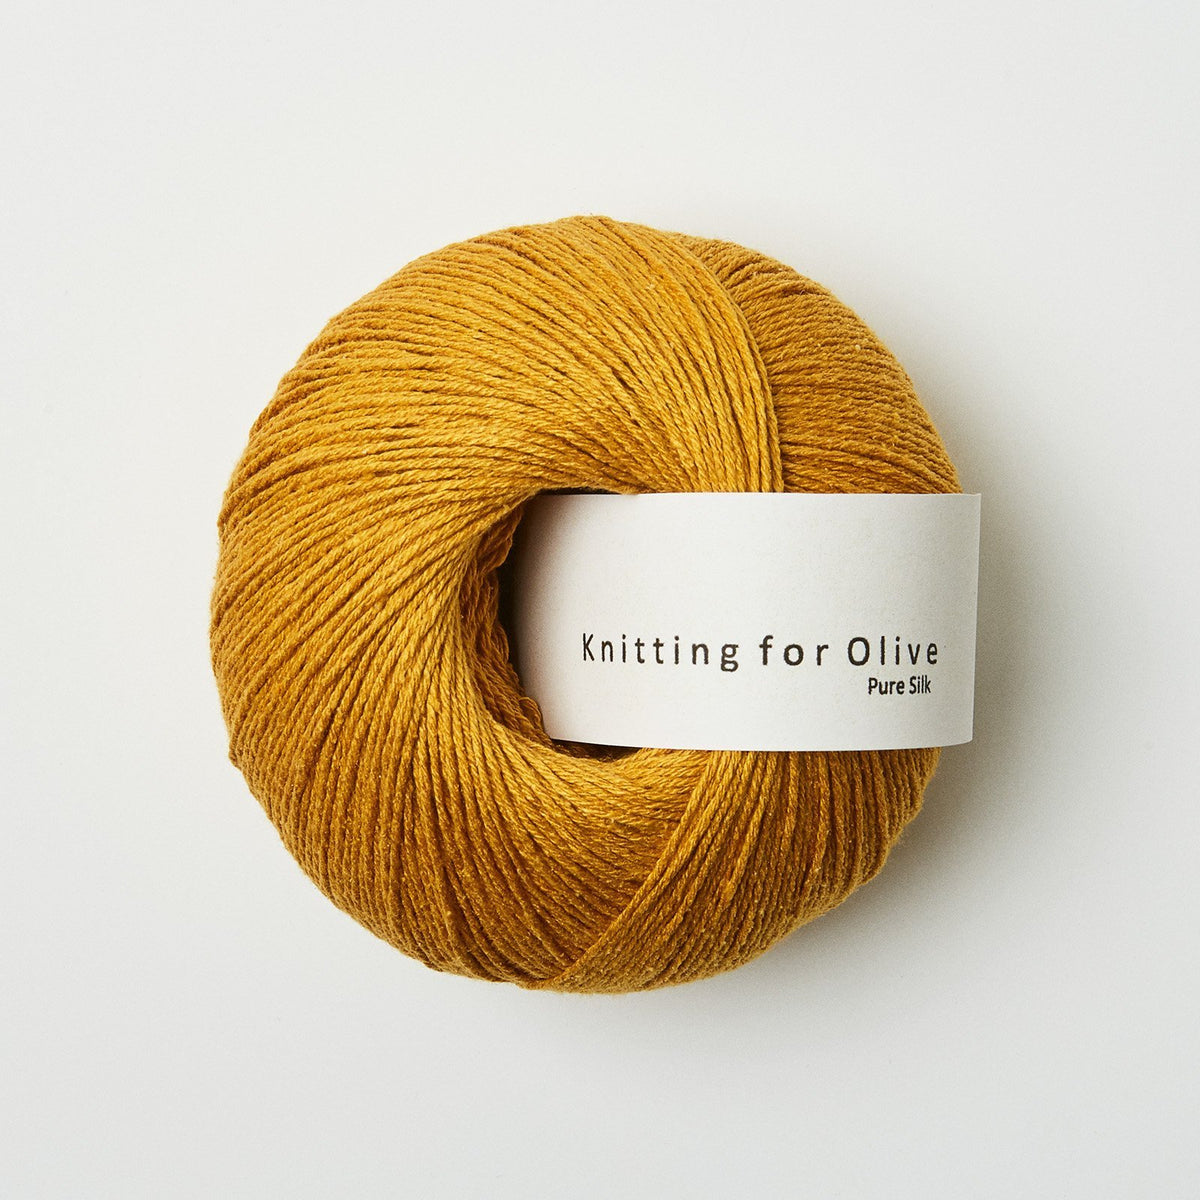 Knitting_for_olive_puresilk_karry_8500_a